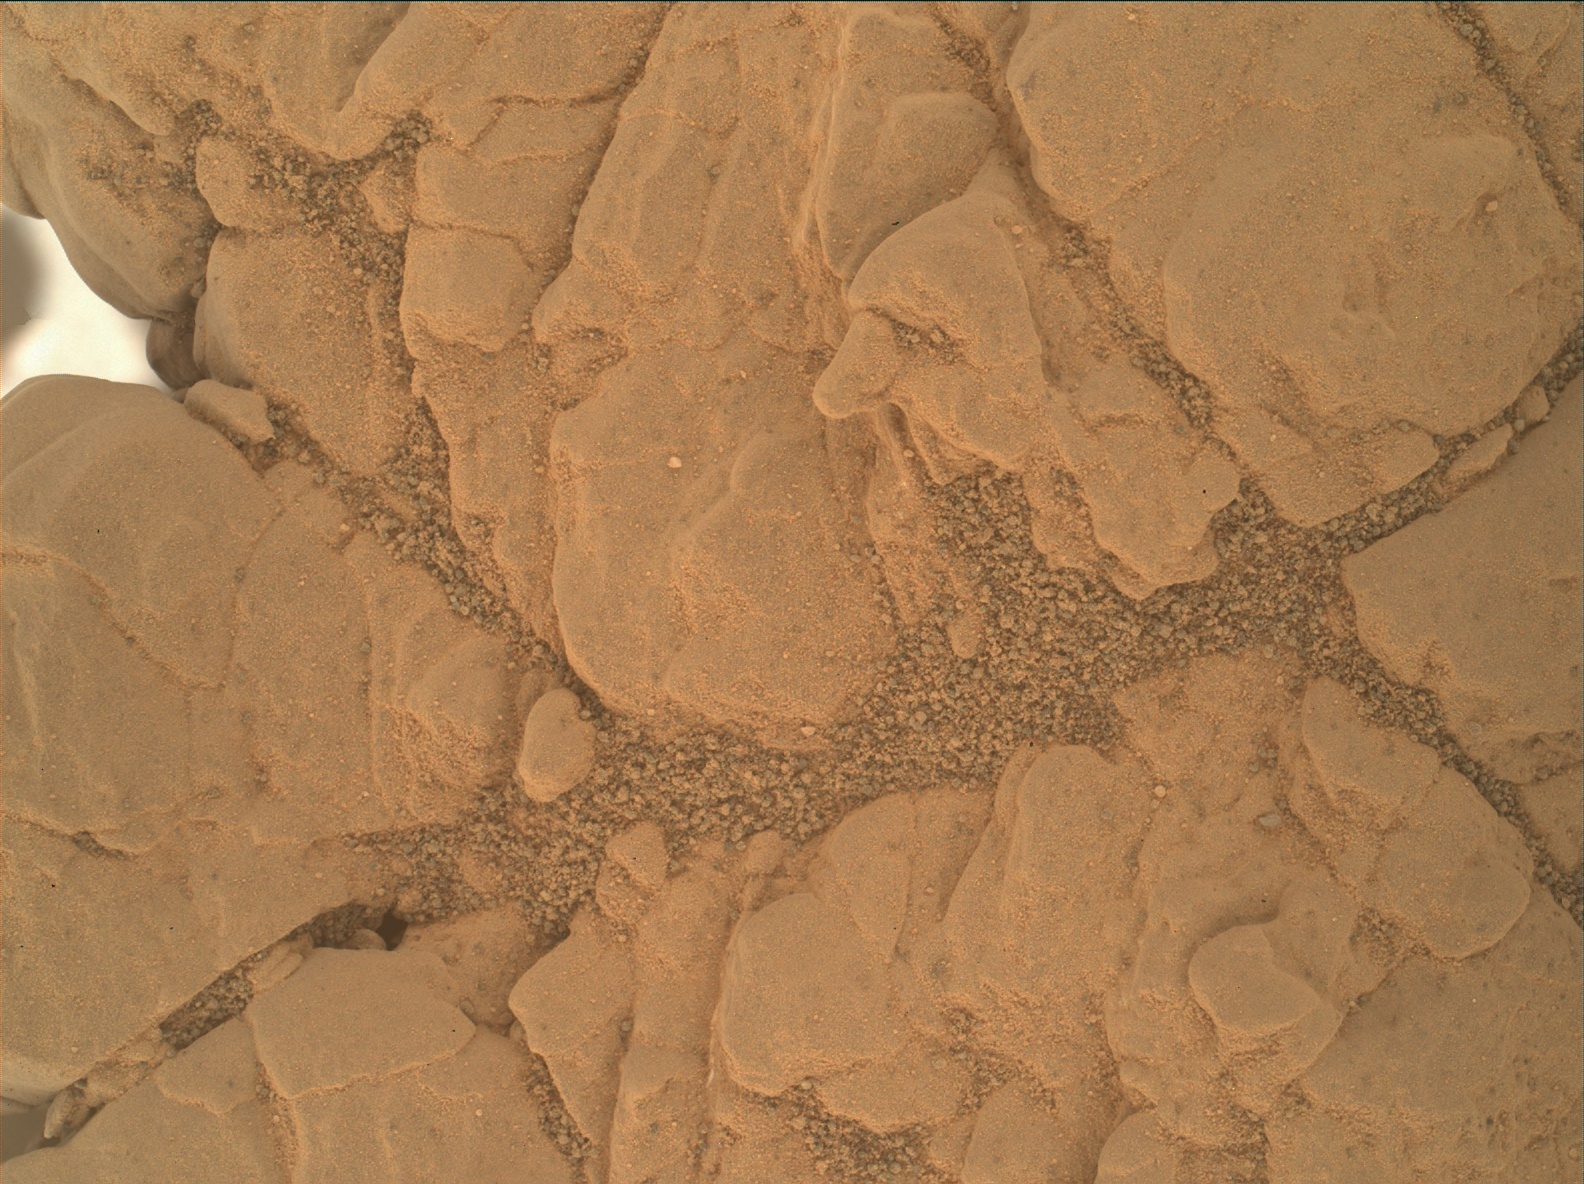 Nasa's Mars rover Curiosity acquired this image using its Mars Hand Lens Imager (MAHLI) on Sol 2477